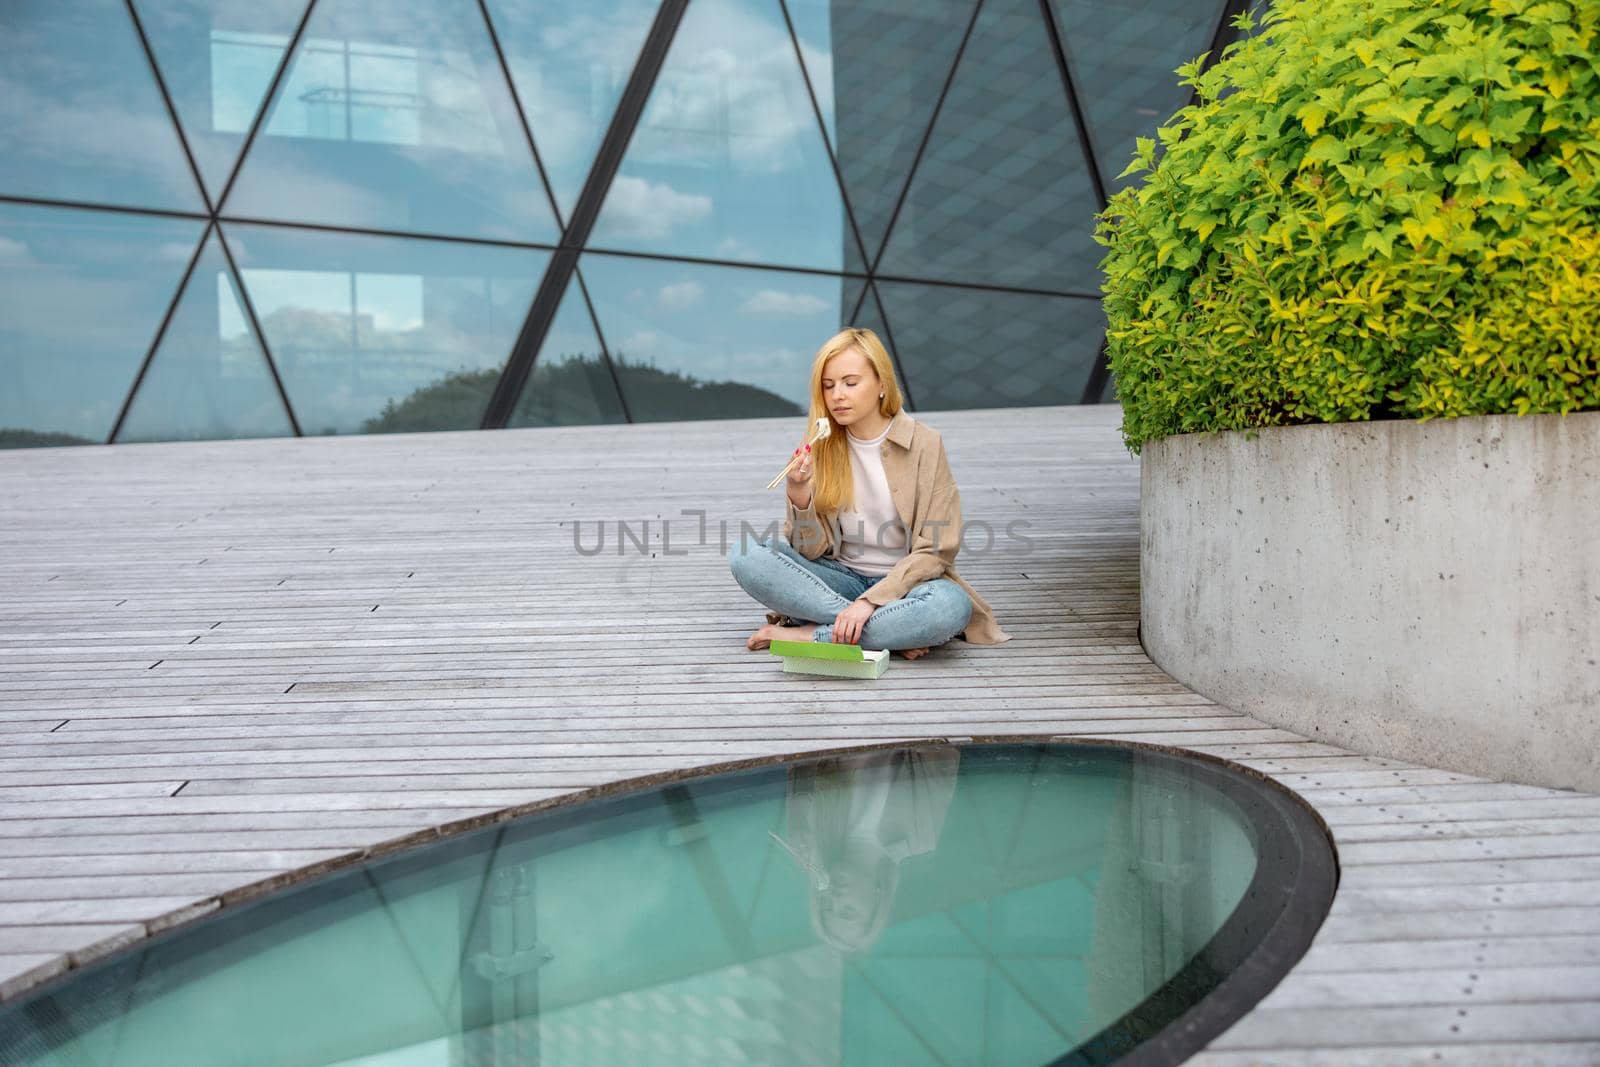 Young beautiful blond woman eating sushi outdoors, on the wooden terrace, by modern building in the city. Tasty food to go. Girl has lunch break, spending time outside, eating Asian food. City life